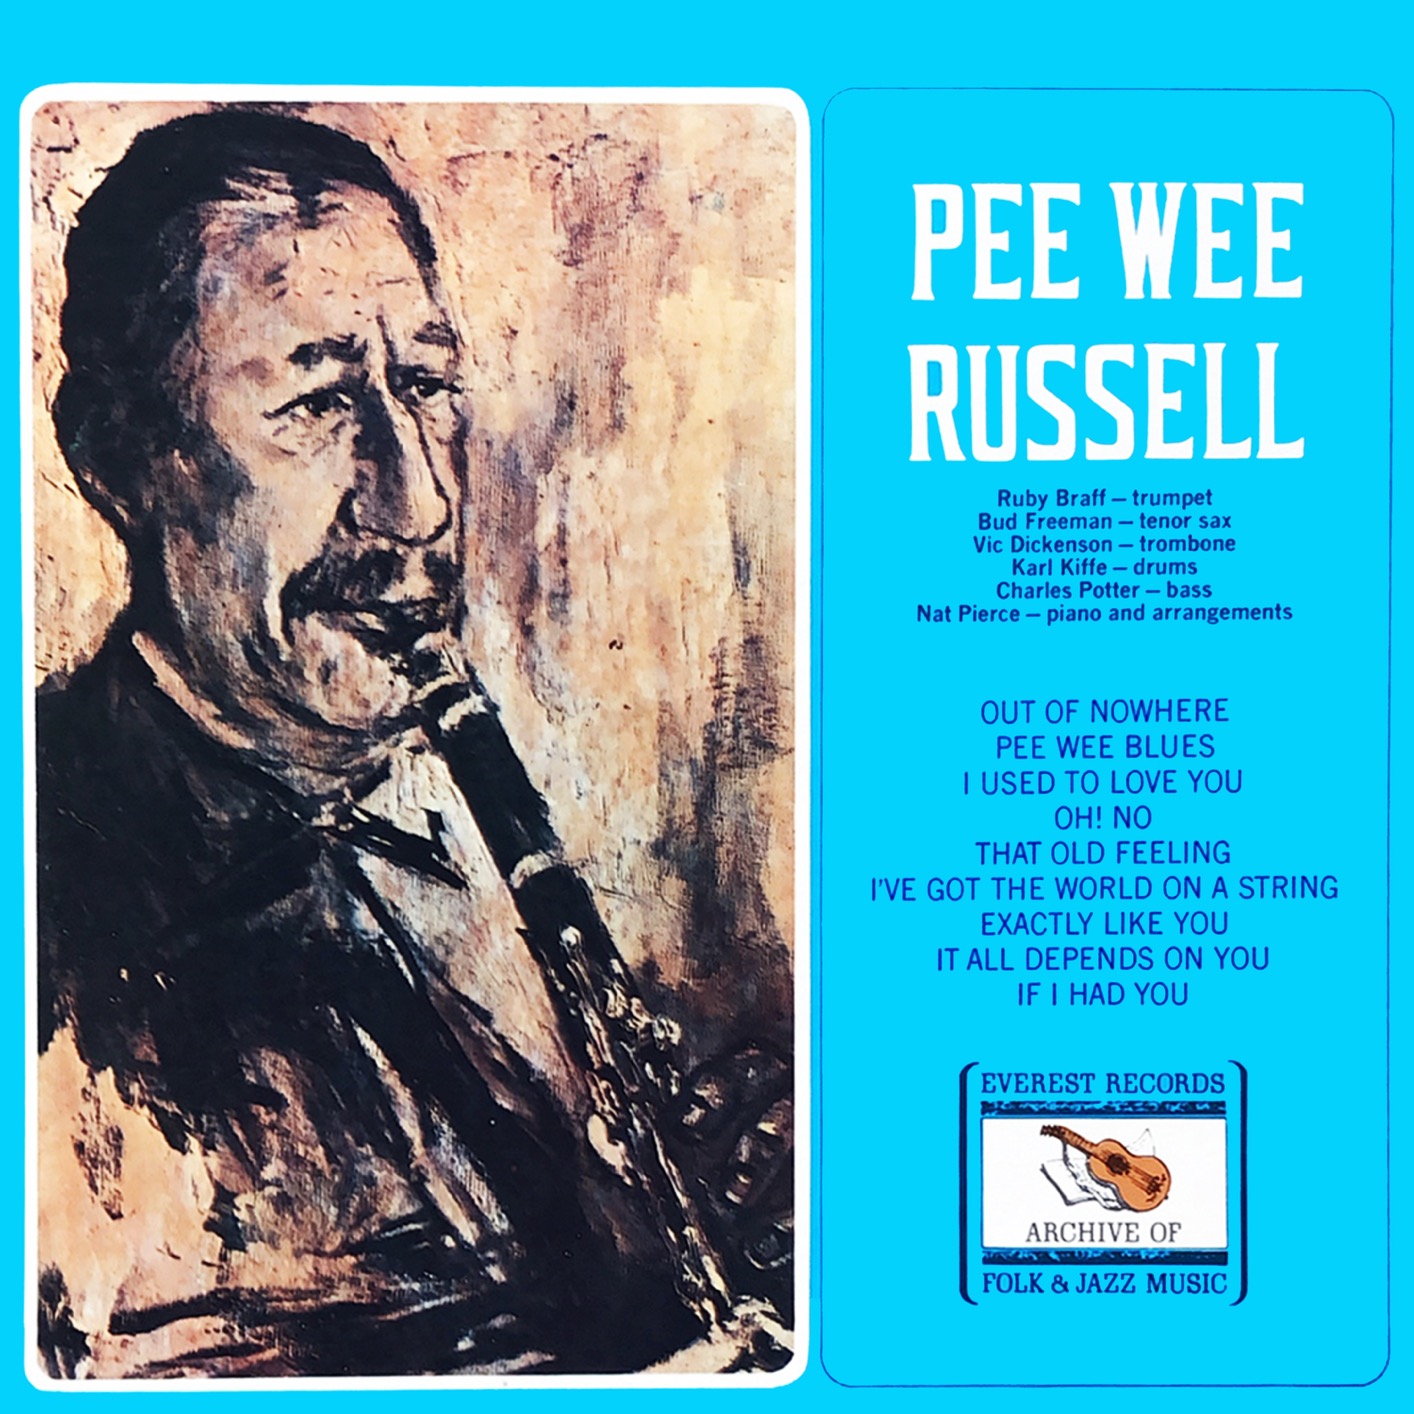 Pee Wee Russell – Pee Wee Russell (Remastered) (1958/2019) [FLAC 24bit/96kHz]